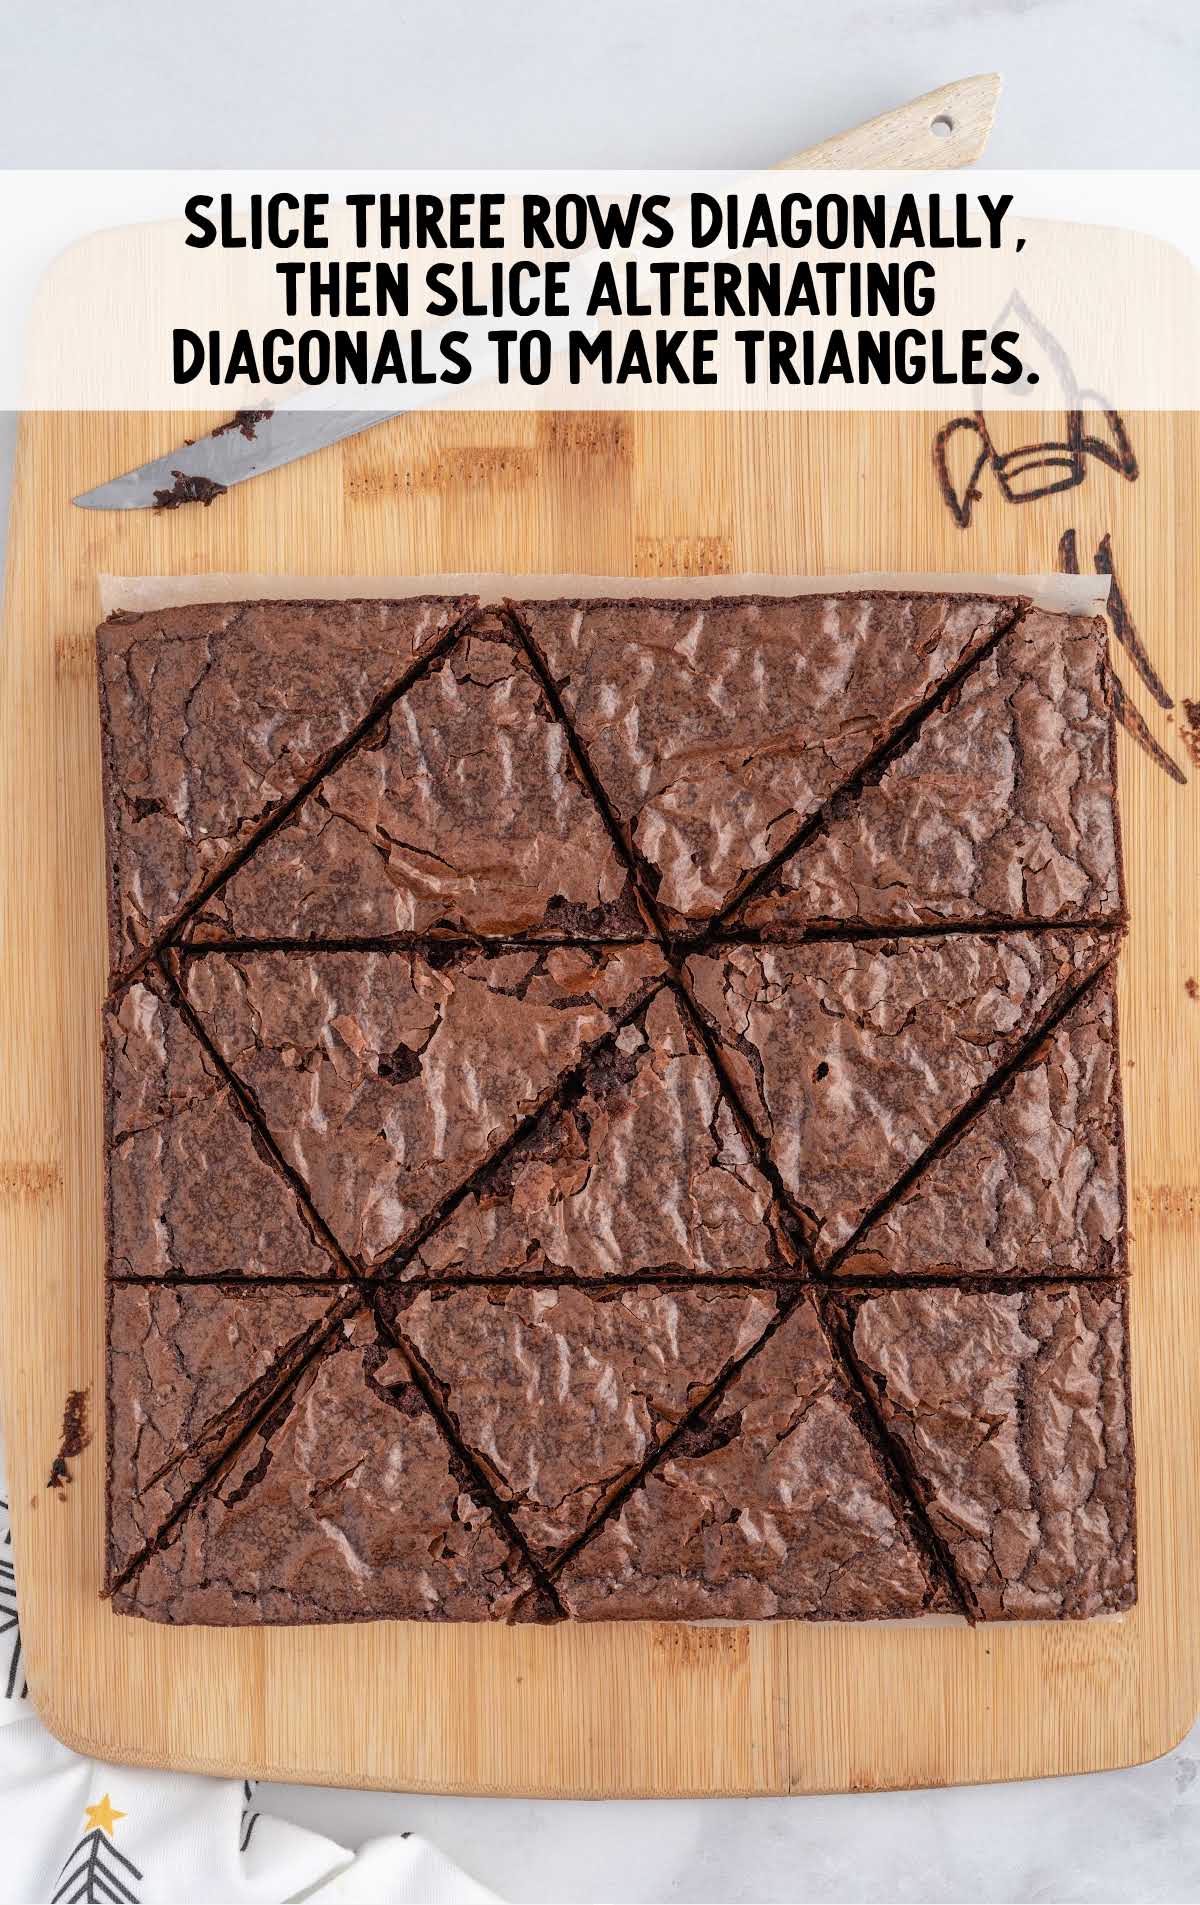 slice brownies into diagonally slices to make triangles on a wooden board